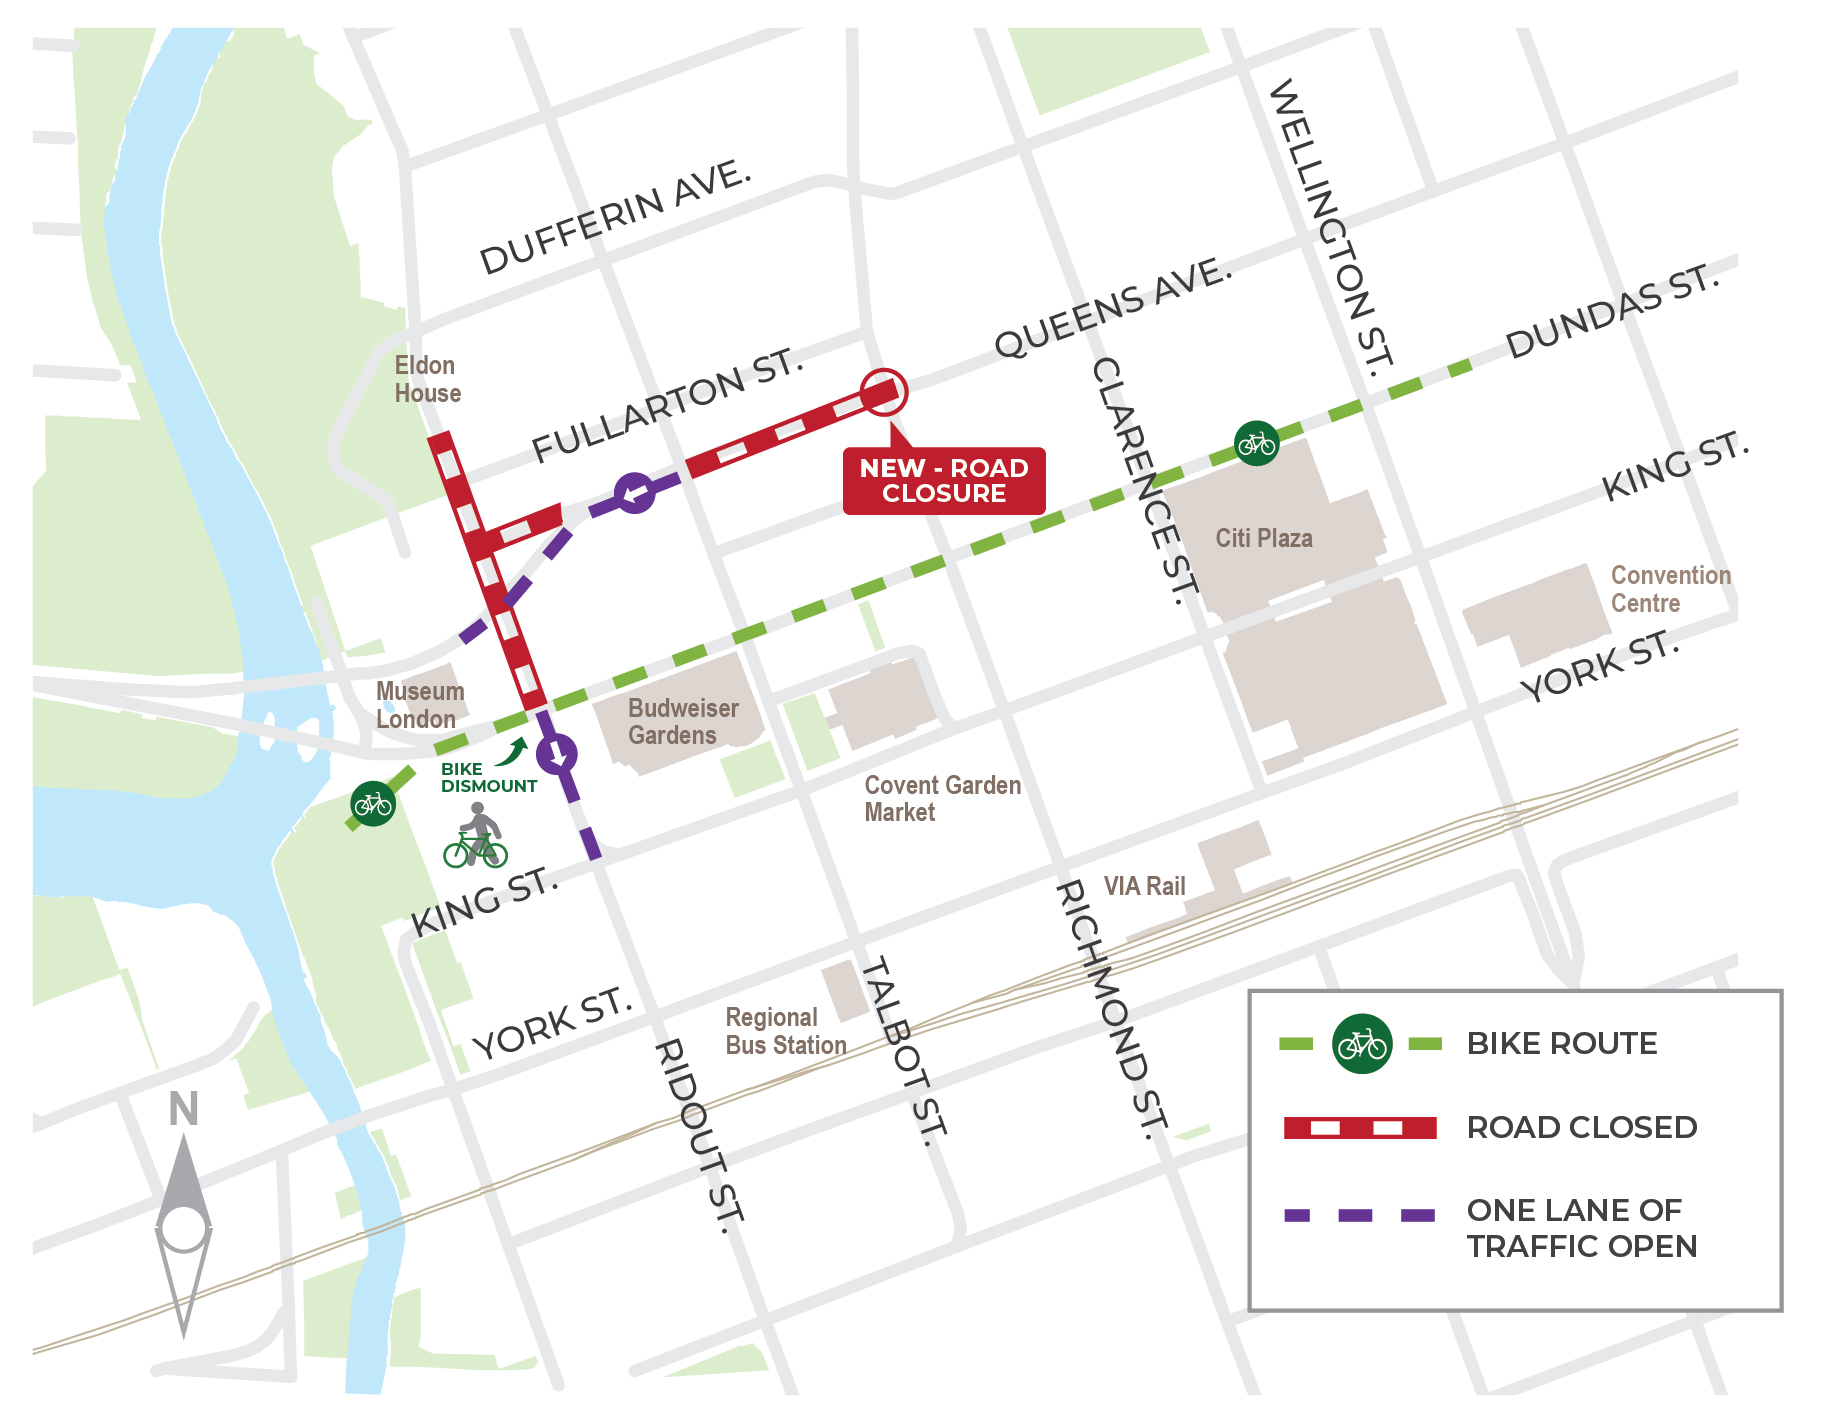 A map of current downtown loop road closures